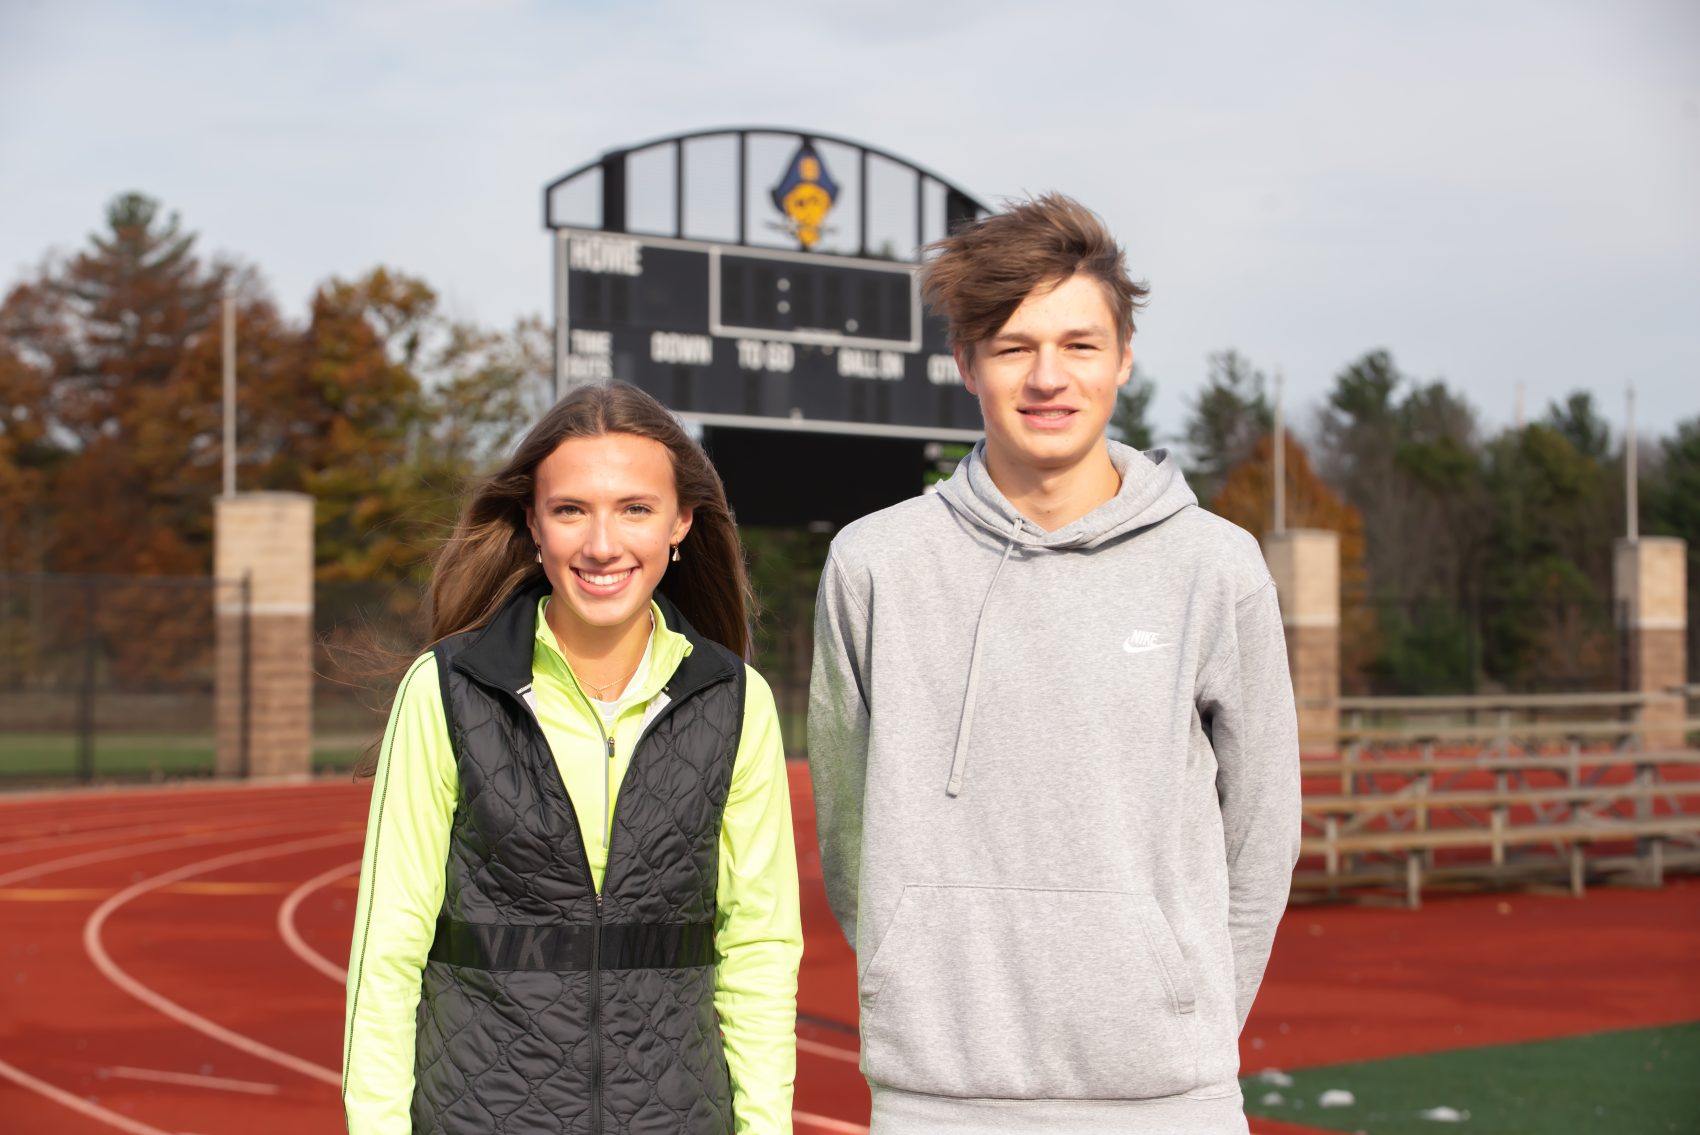 Grand Haven’s cross country fortunes lie with top runners Seth Norder, Valerie Beeck